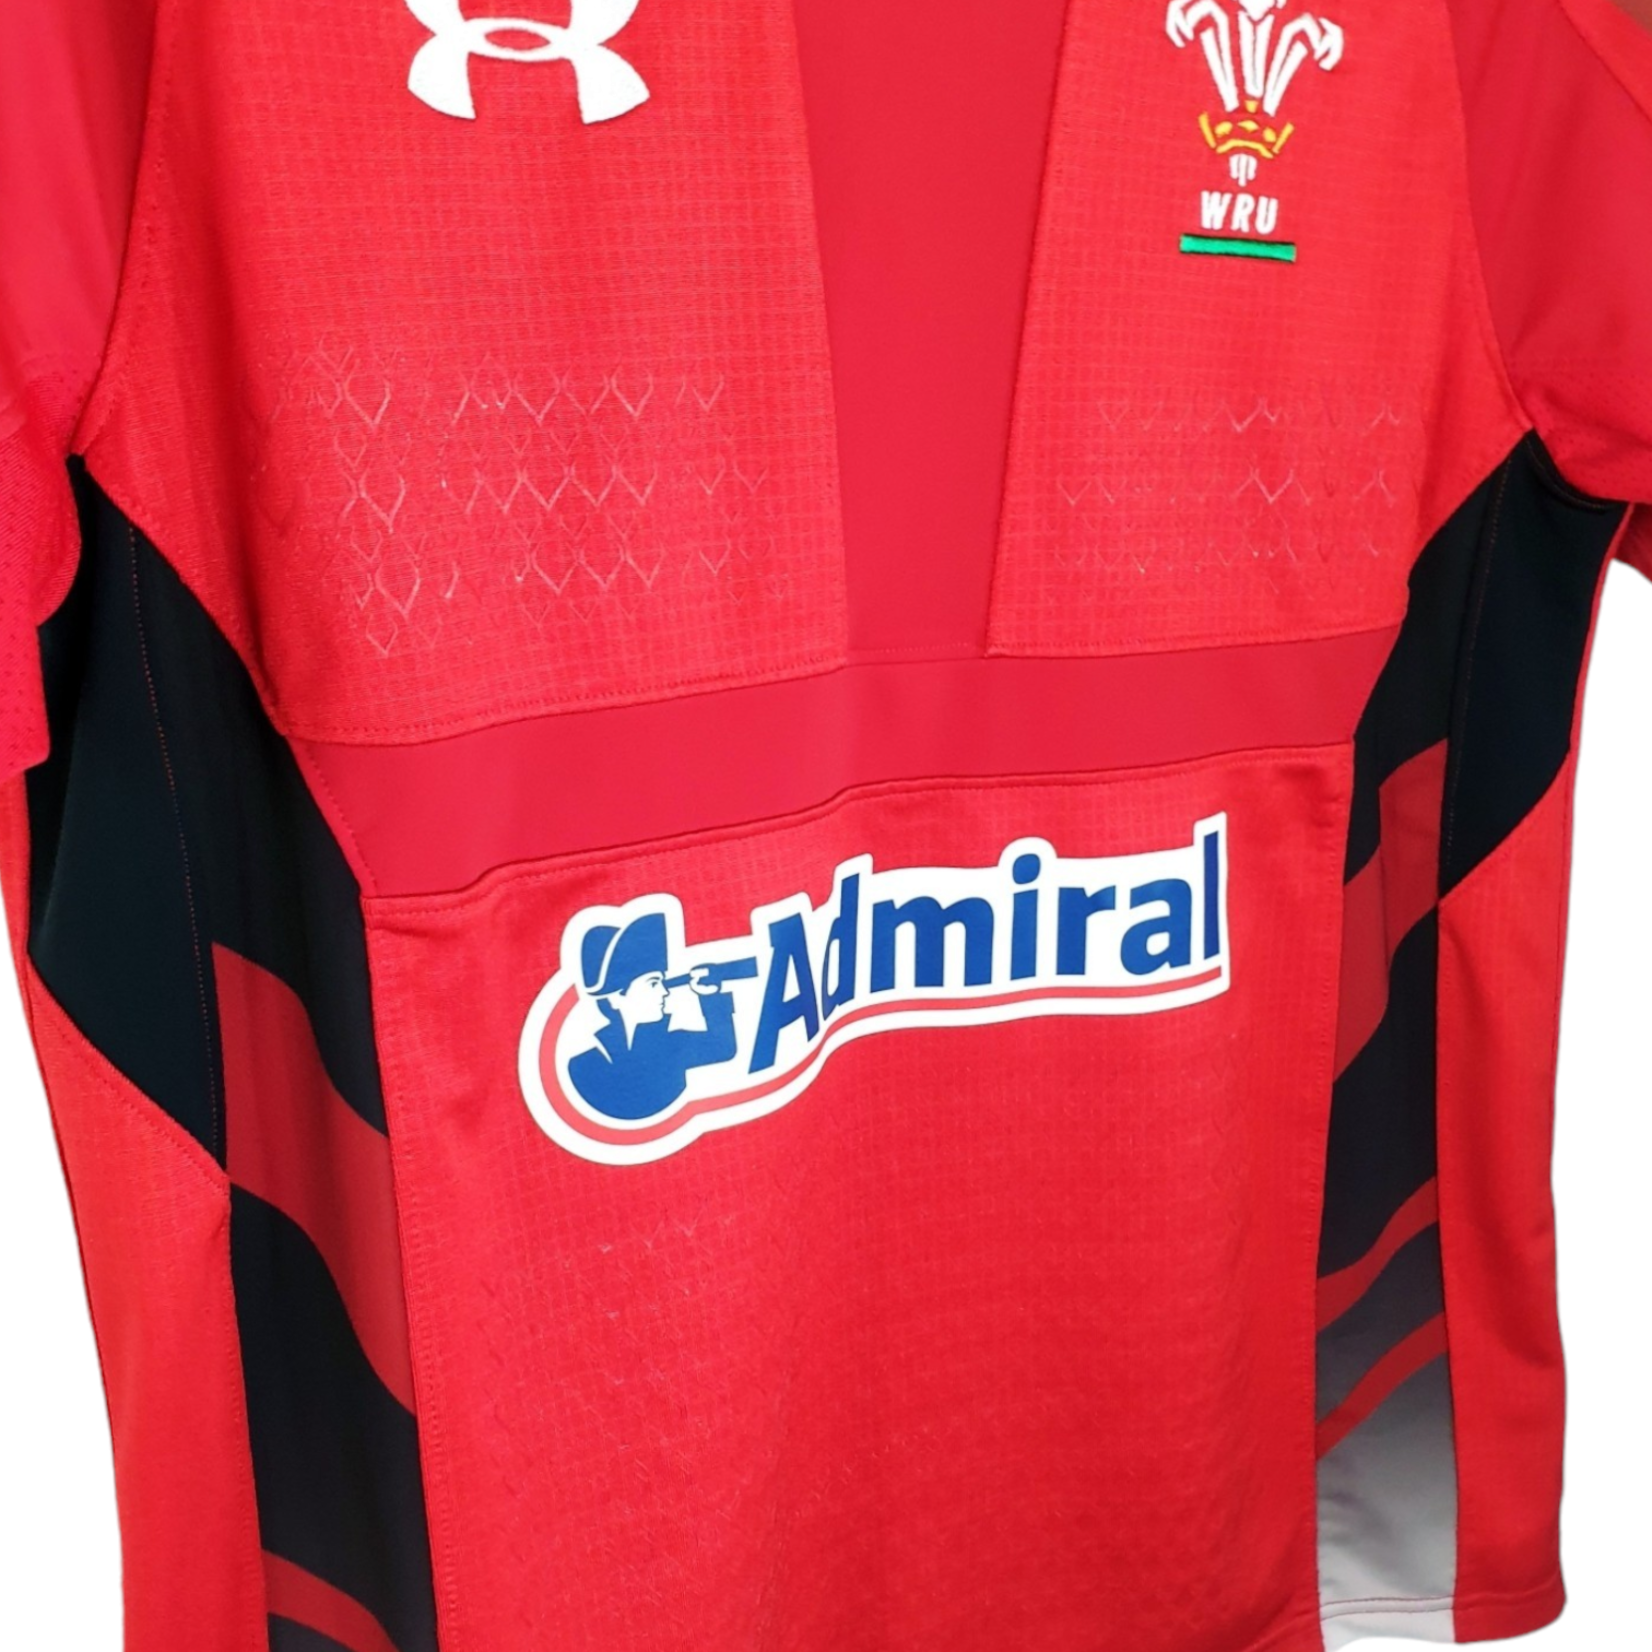 Under Armour Original Under Armour vintage rugby shirt Wales 2014/15